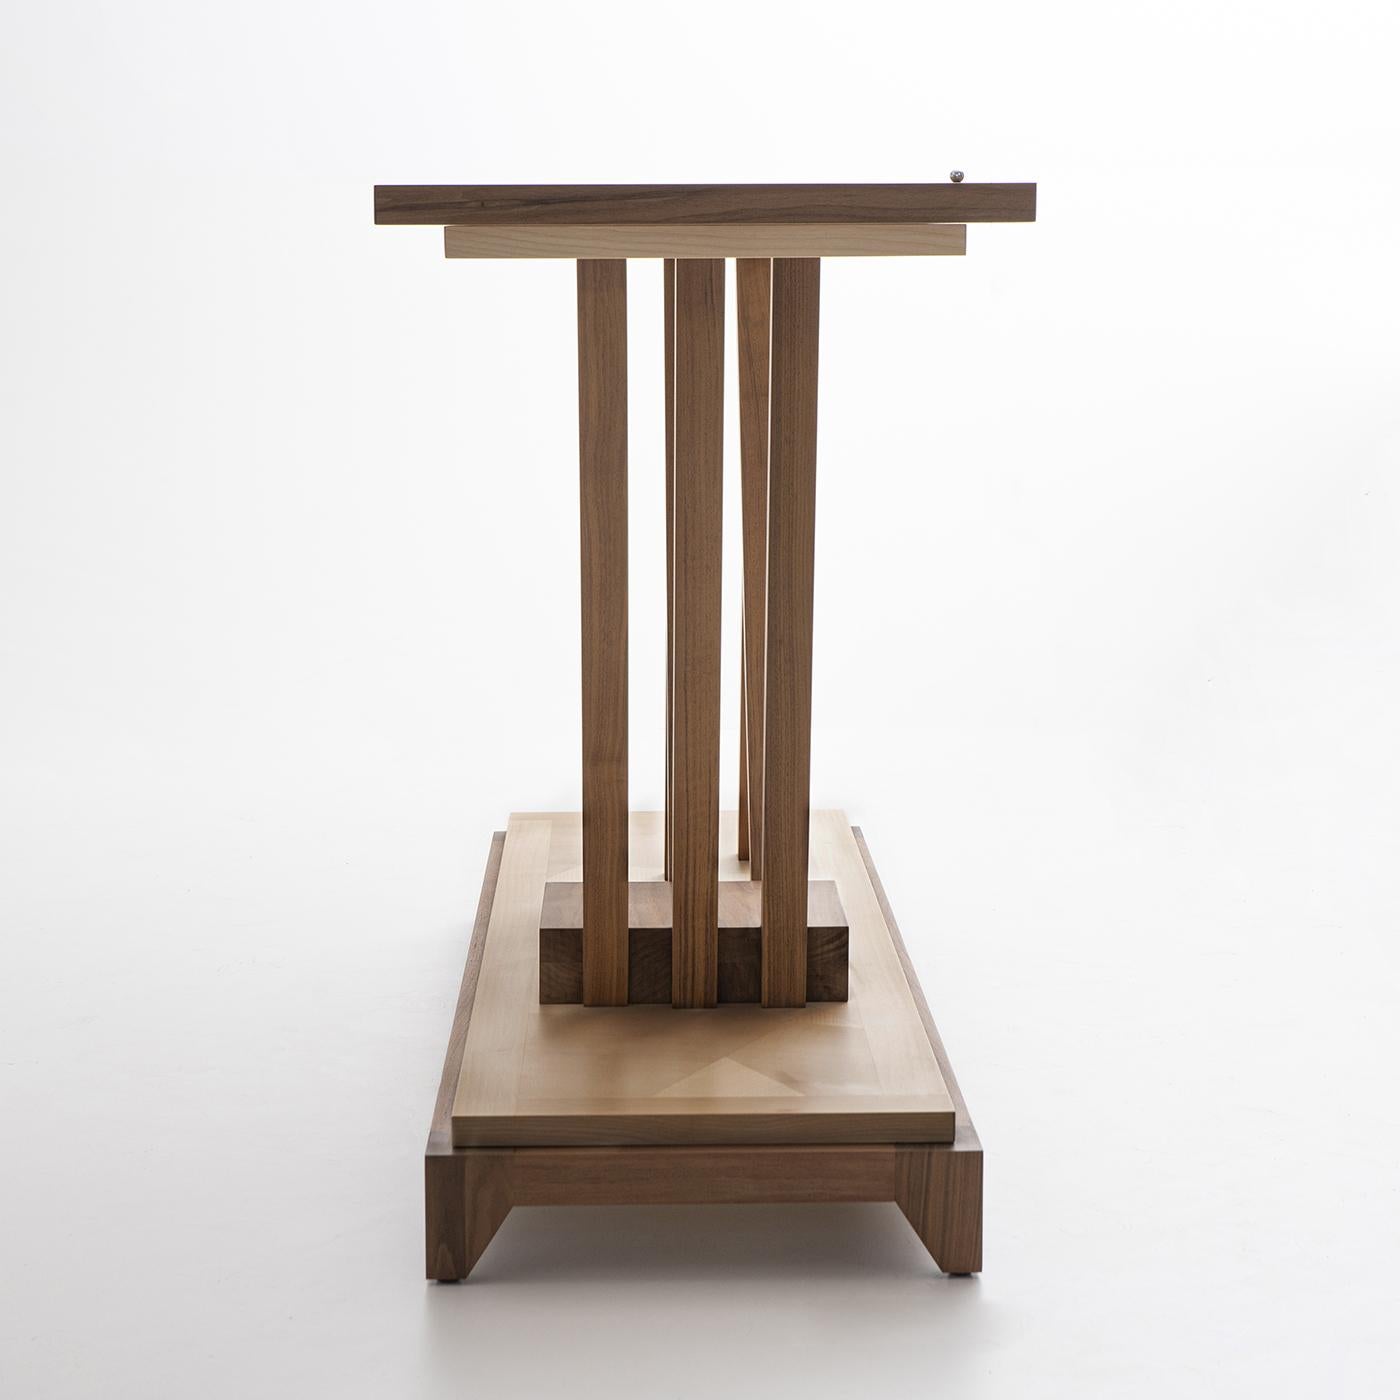 The sleek lines of this console table in walnut and maple are a contemporary take on tree branches and their organic shapes. The lower sculptural ensemble of crossing and interrupted elements serves as the suport for the rectangular top. The top